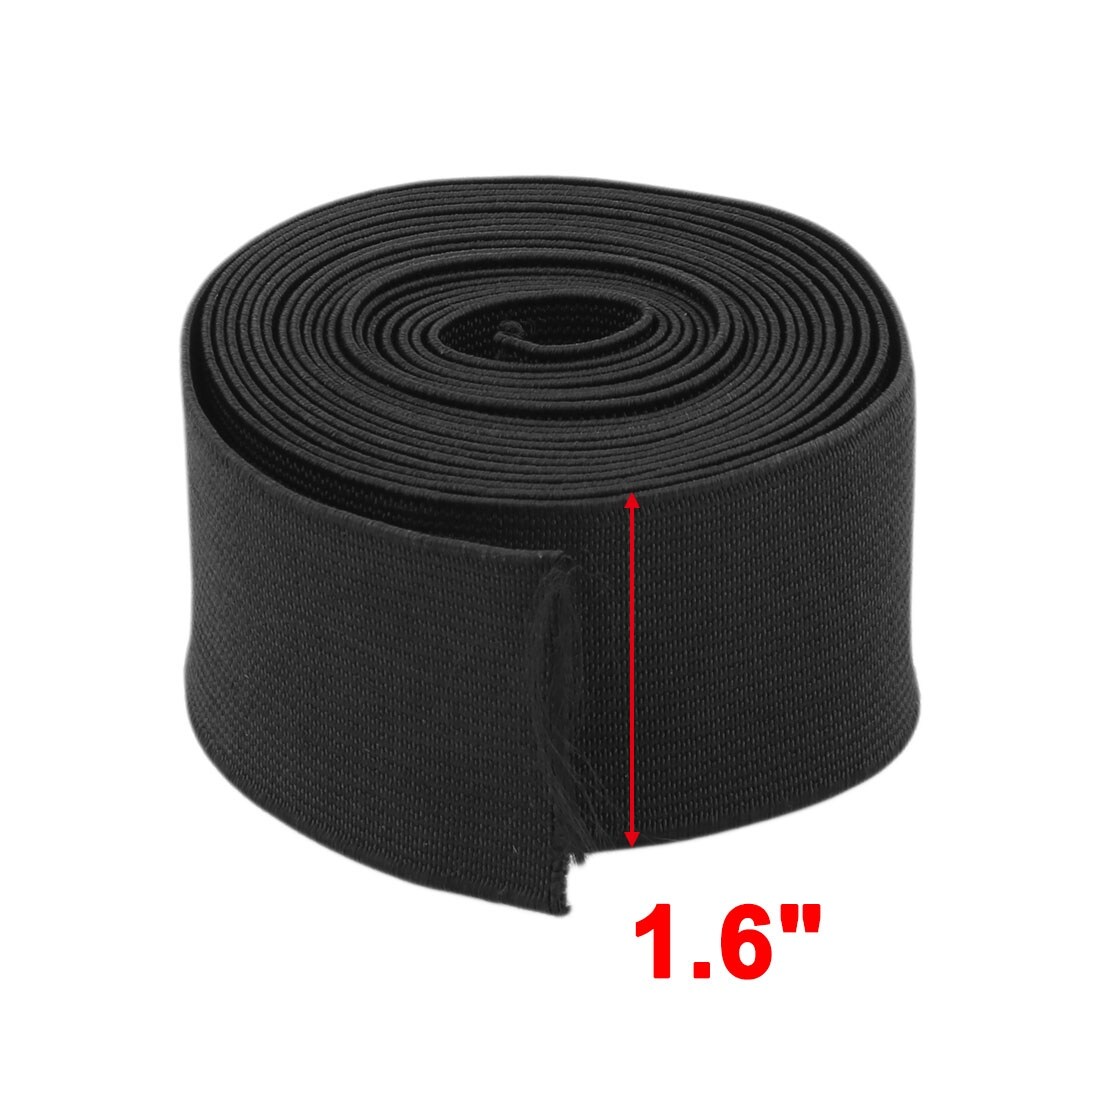 Unique Bargains Black Cotton Sewing Thread Reel Spool Tailoring String 